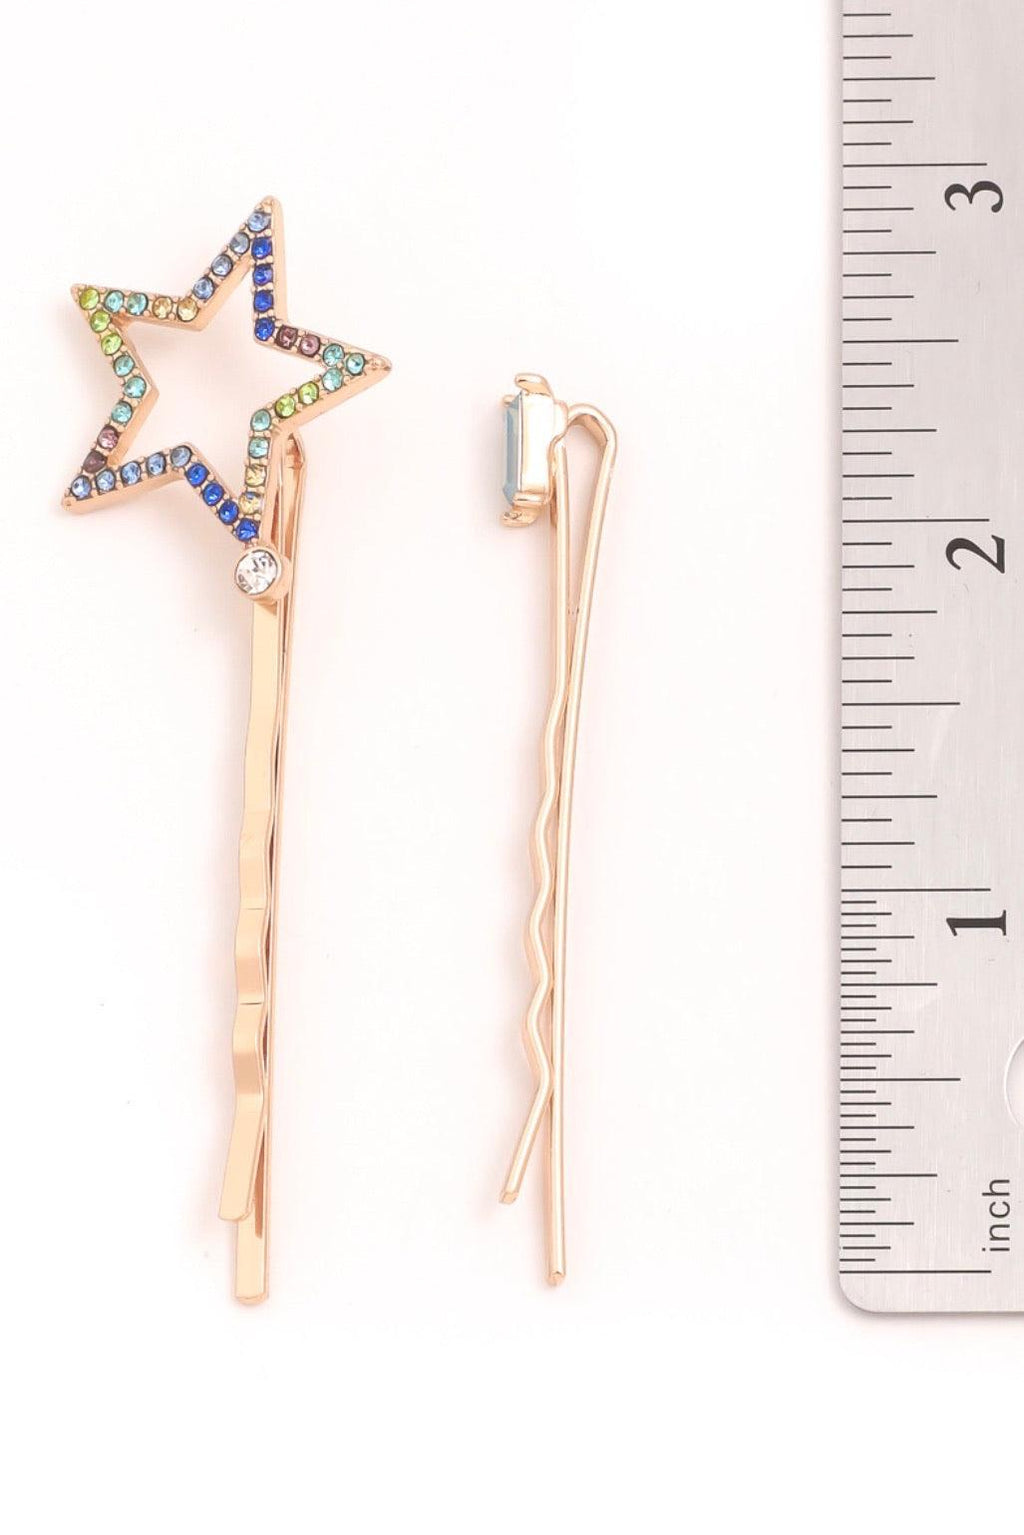 Studded Star Hair Pin Set - Pineapple Lain Boutique